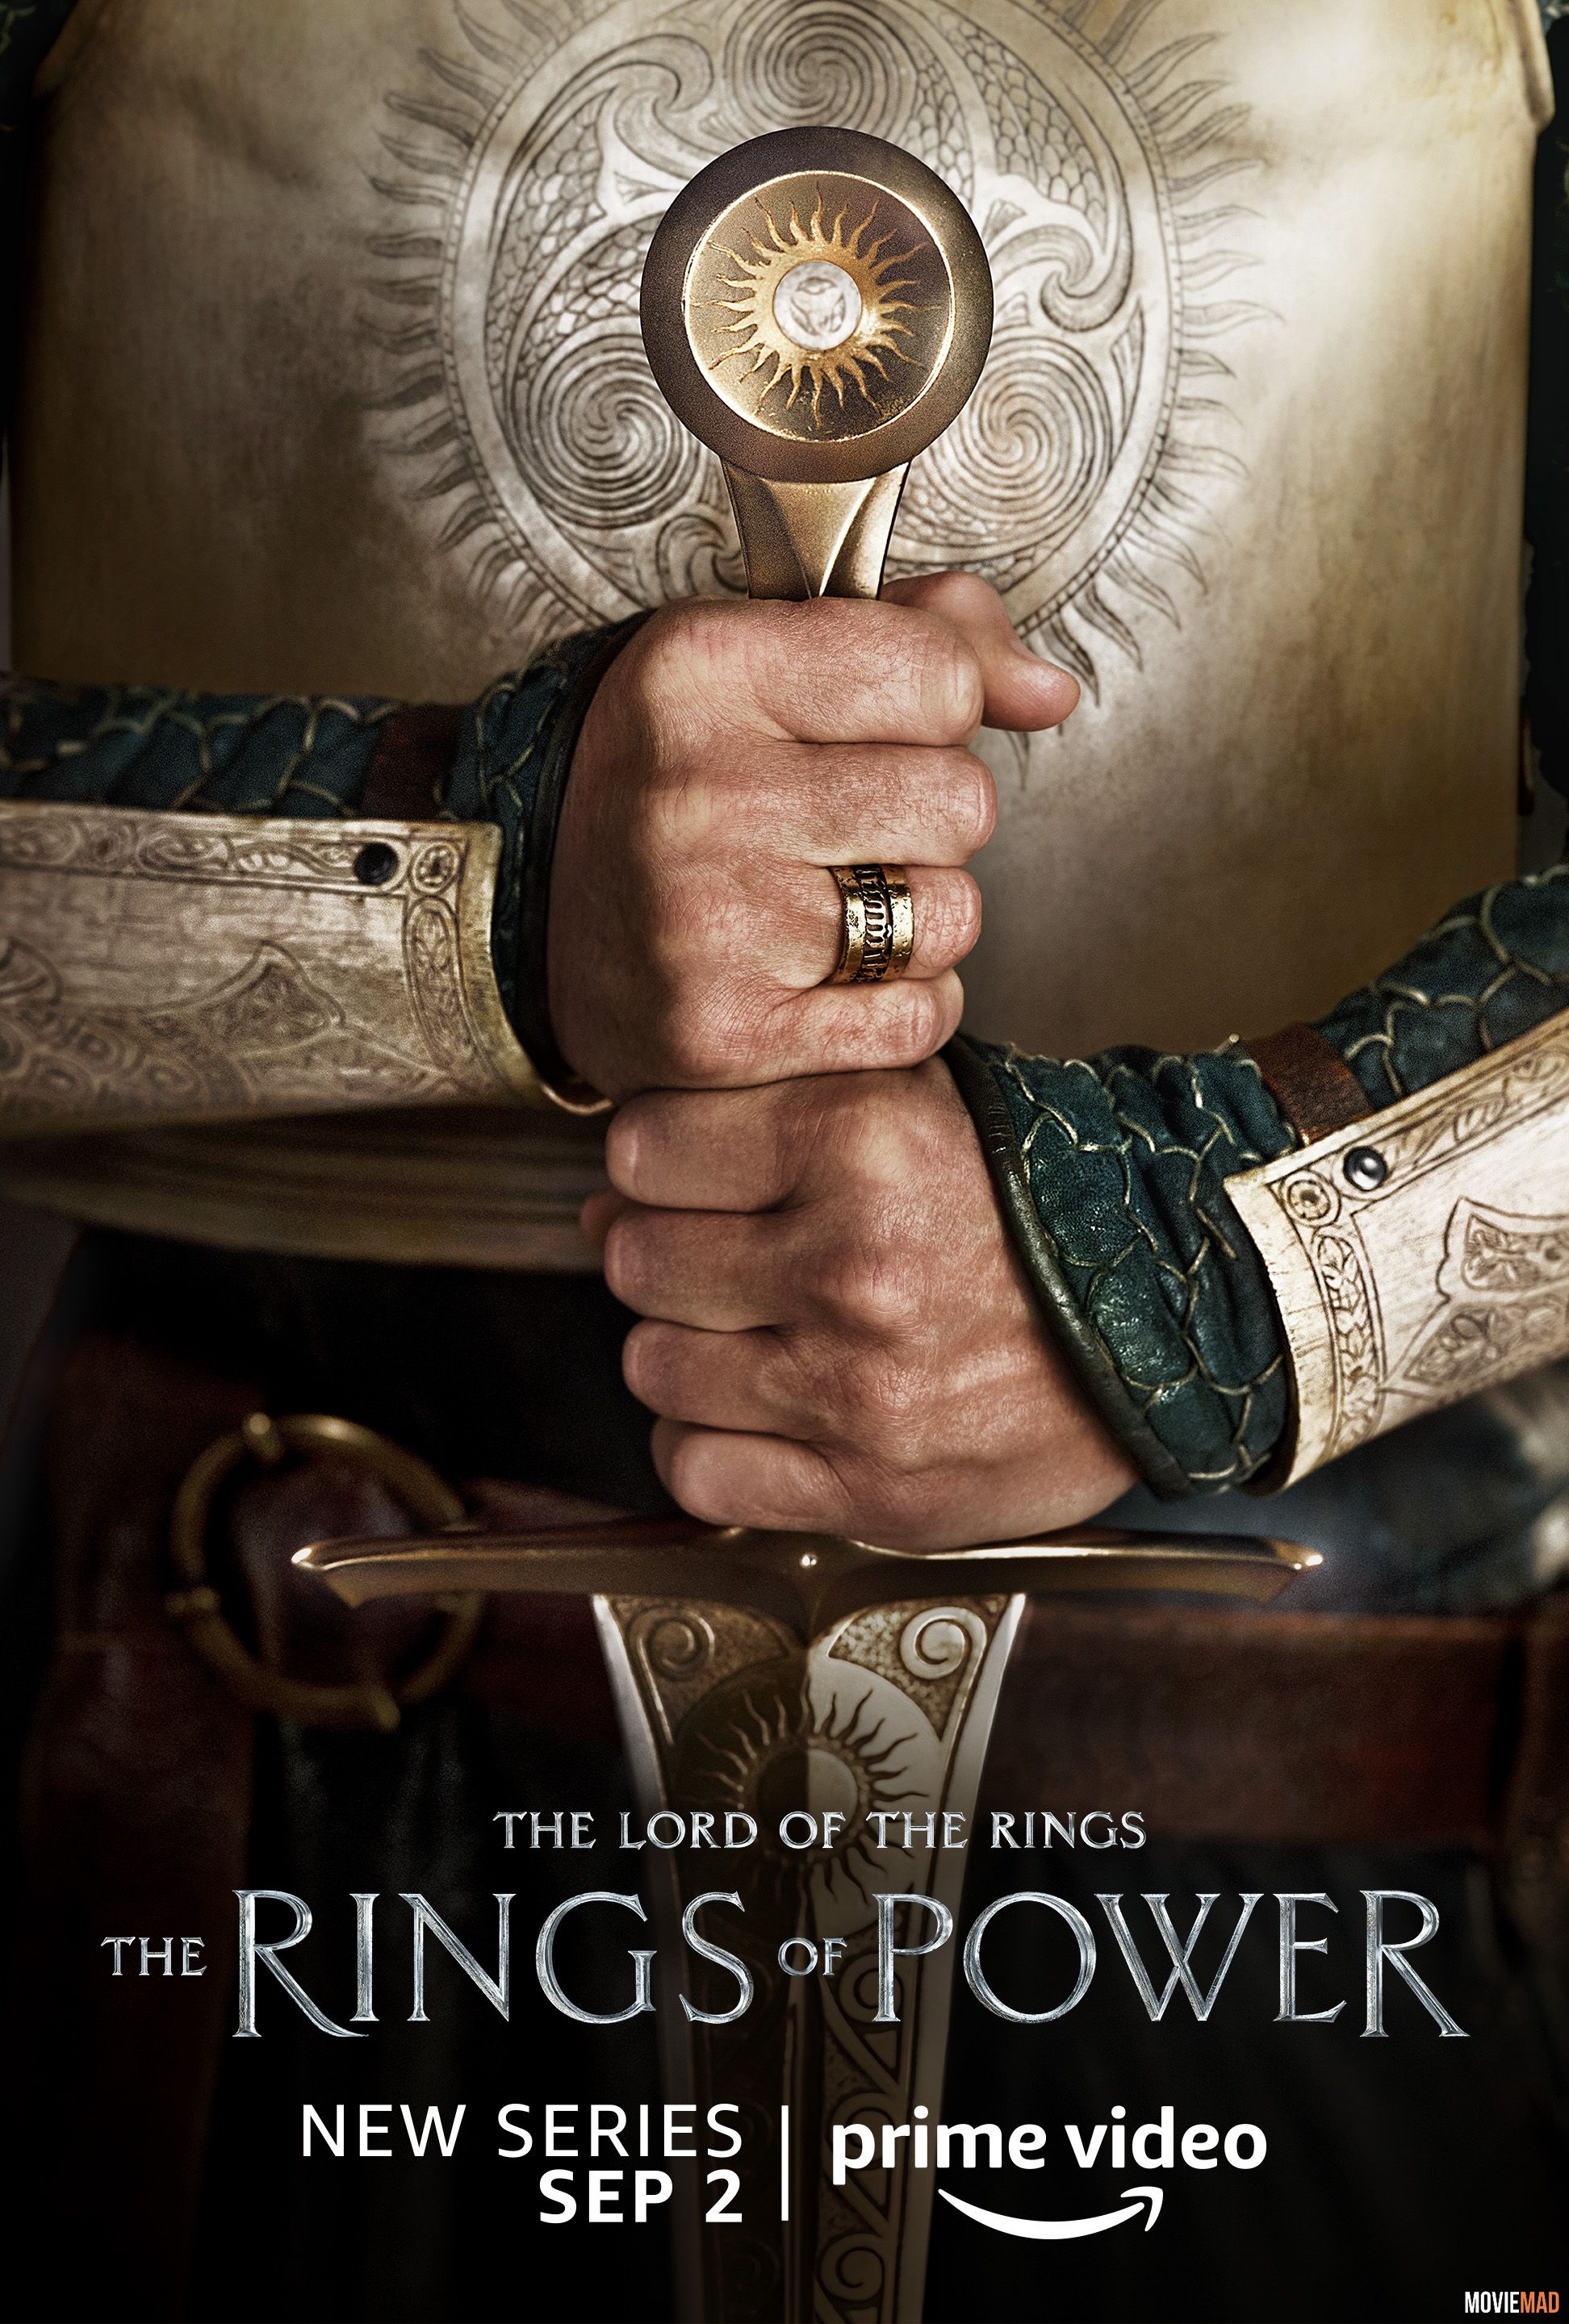 full moviesThe Lord of the Rings The Rings of Power S01 (2022) (E08 ADDED) Hindi Dubbed ORG Prime Web Series HDRip 1080p 720p 480p